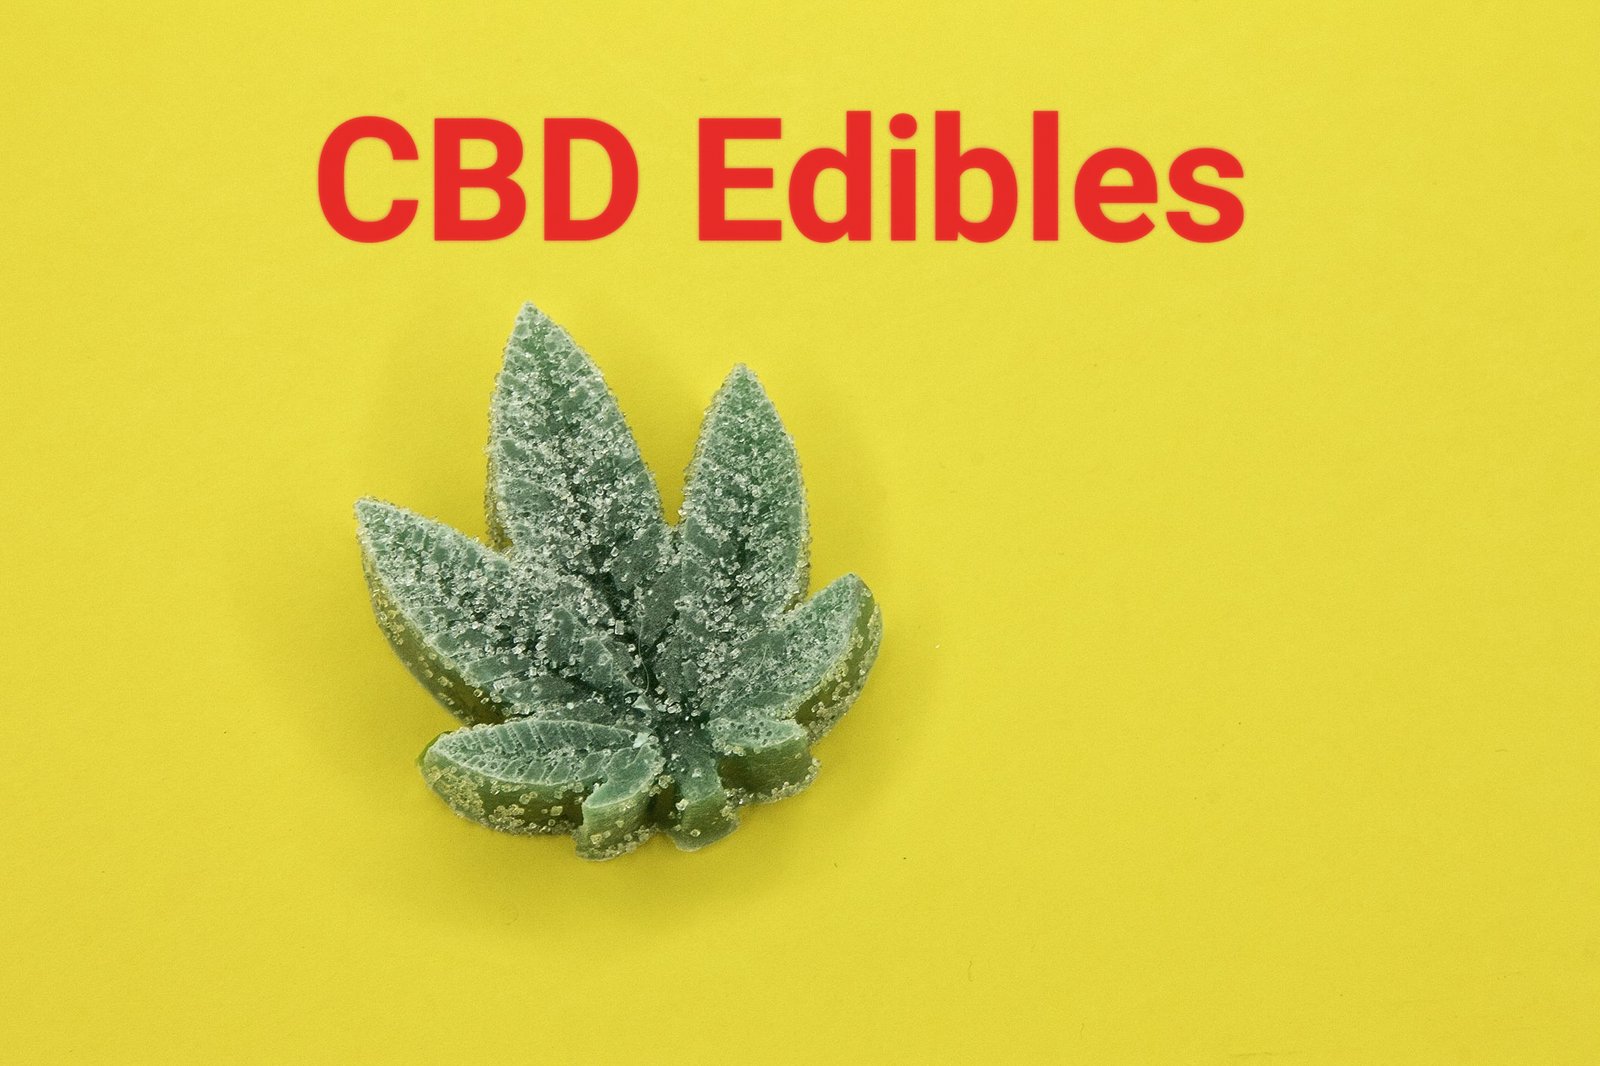 CBD Edibles: What We Know, Benefits & Top Products